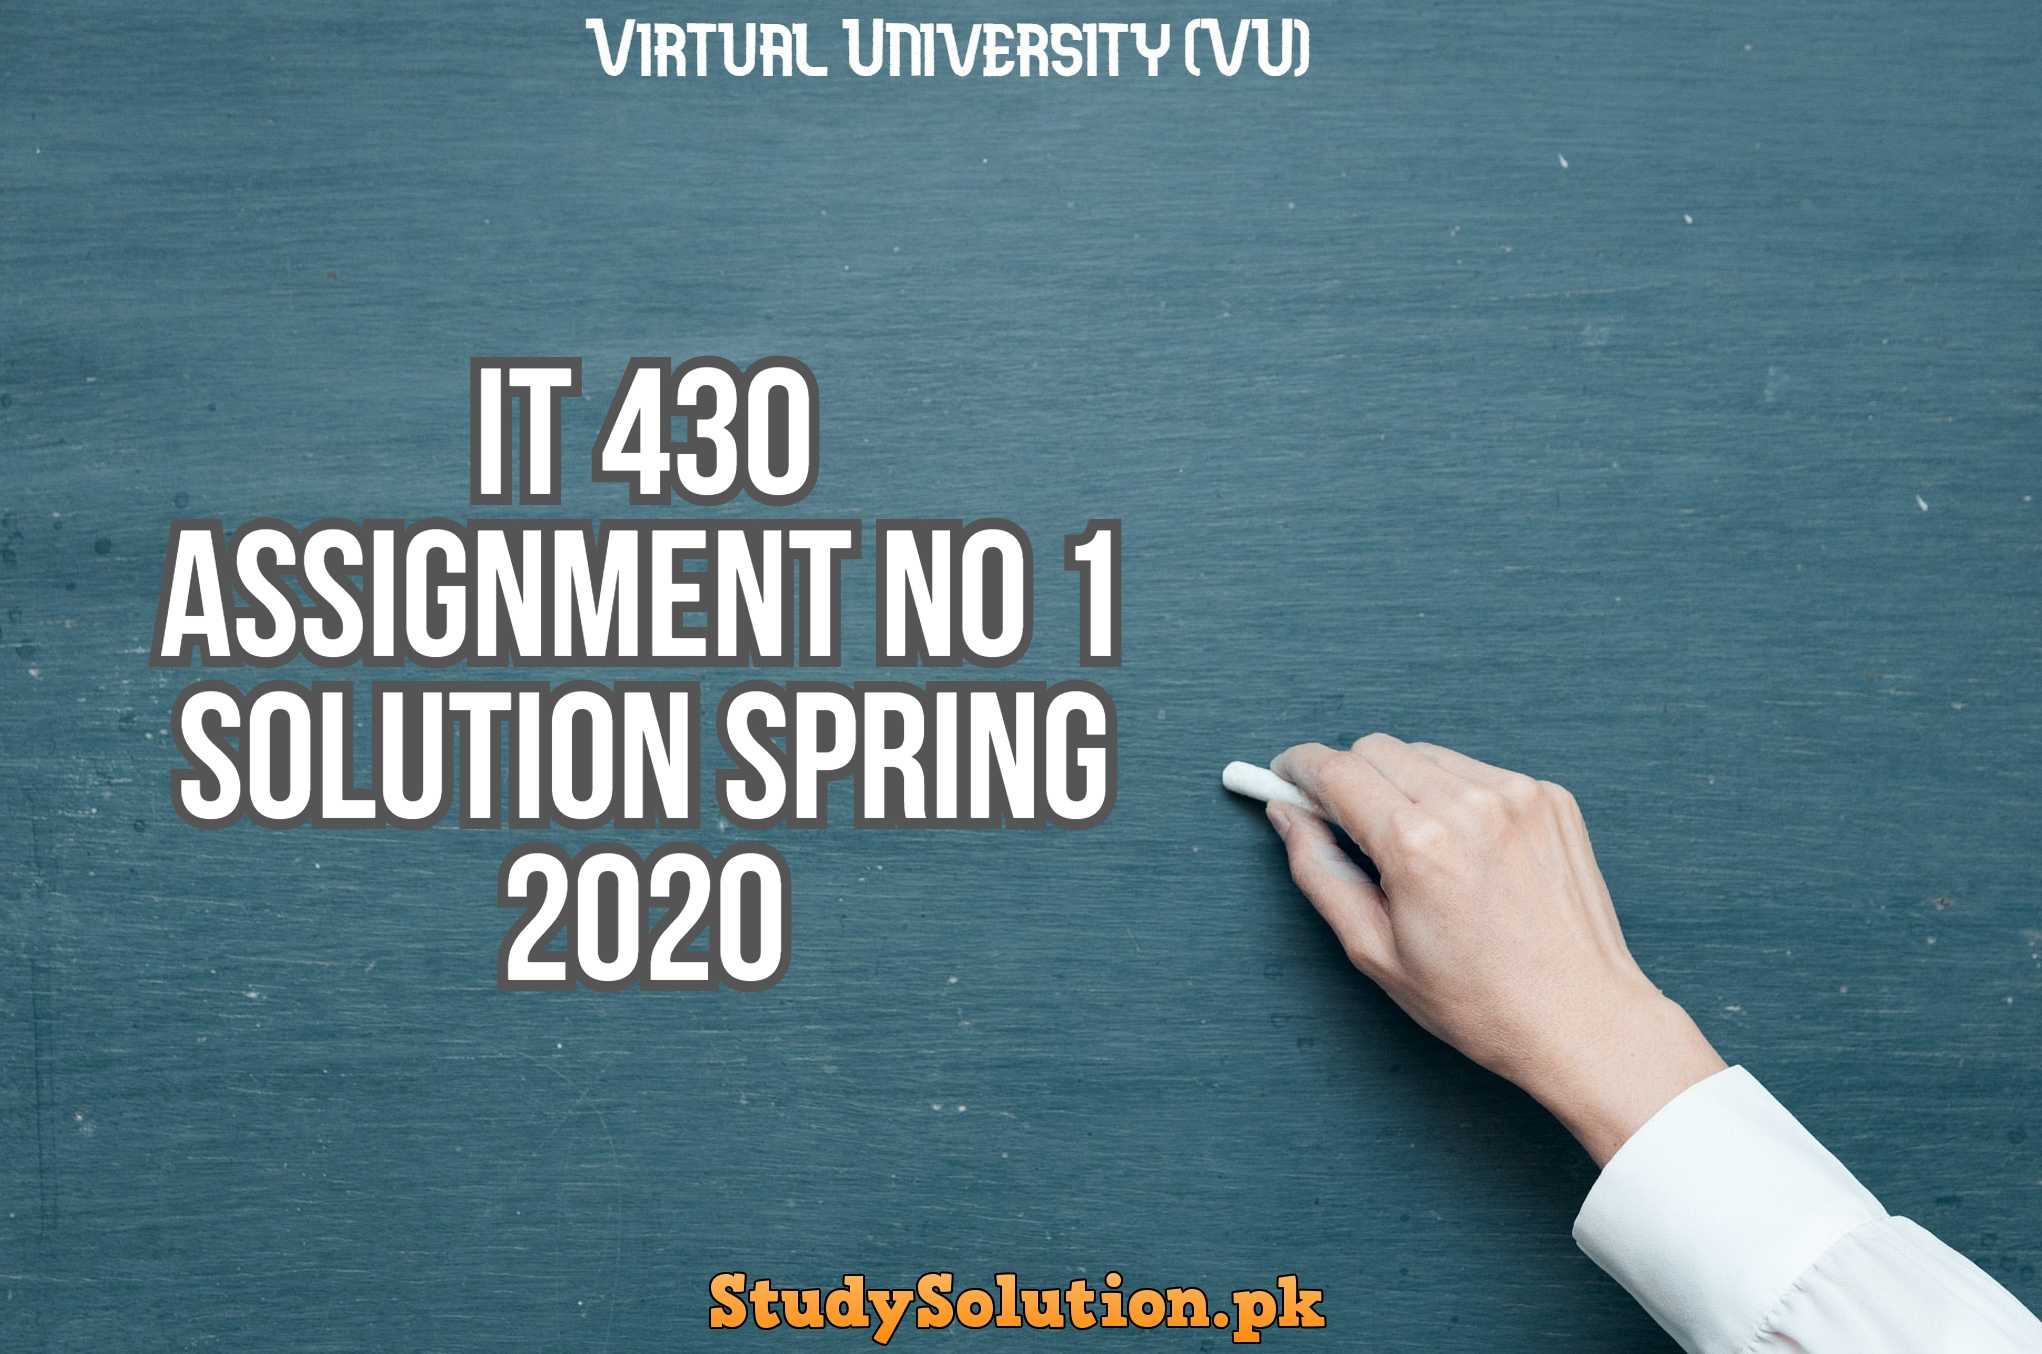 IT 430 Assignment No 1 Solution Spring 2020